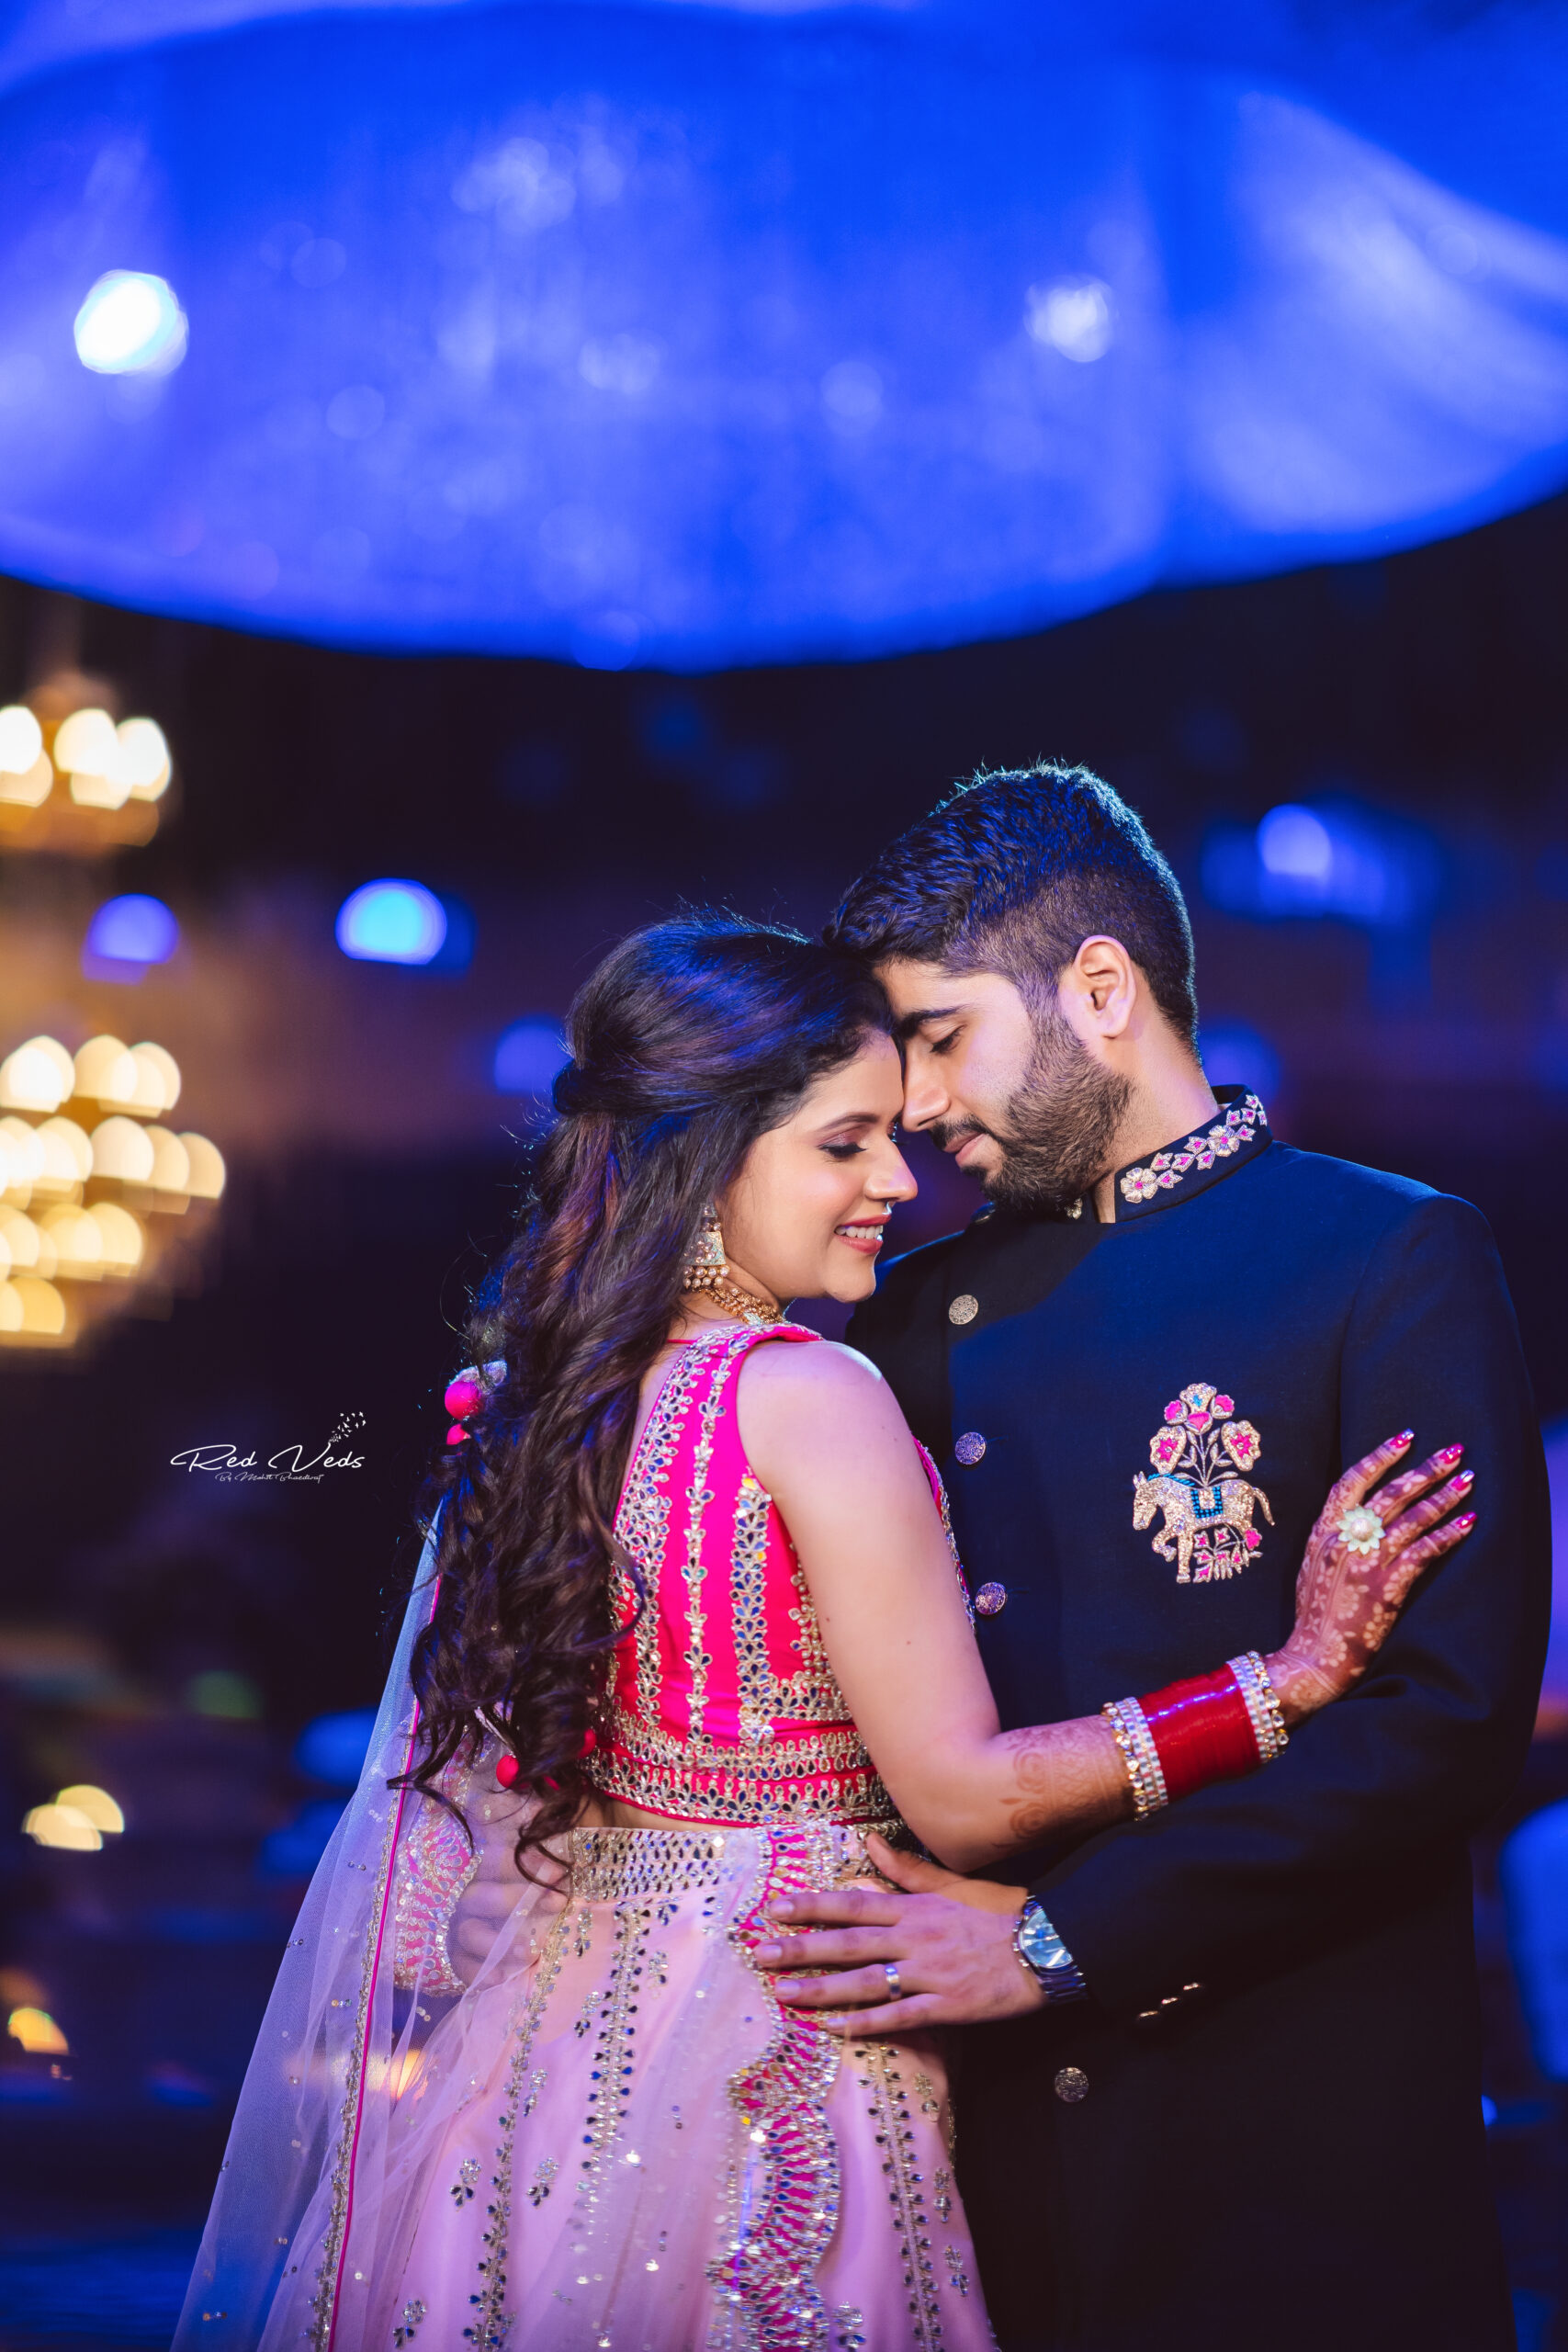 Tender Indian wedding couple poses on the path in the park Stock Photo |  Adobe Stock